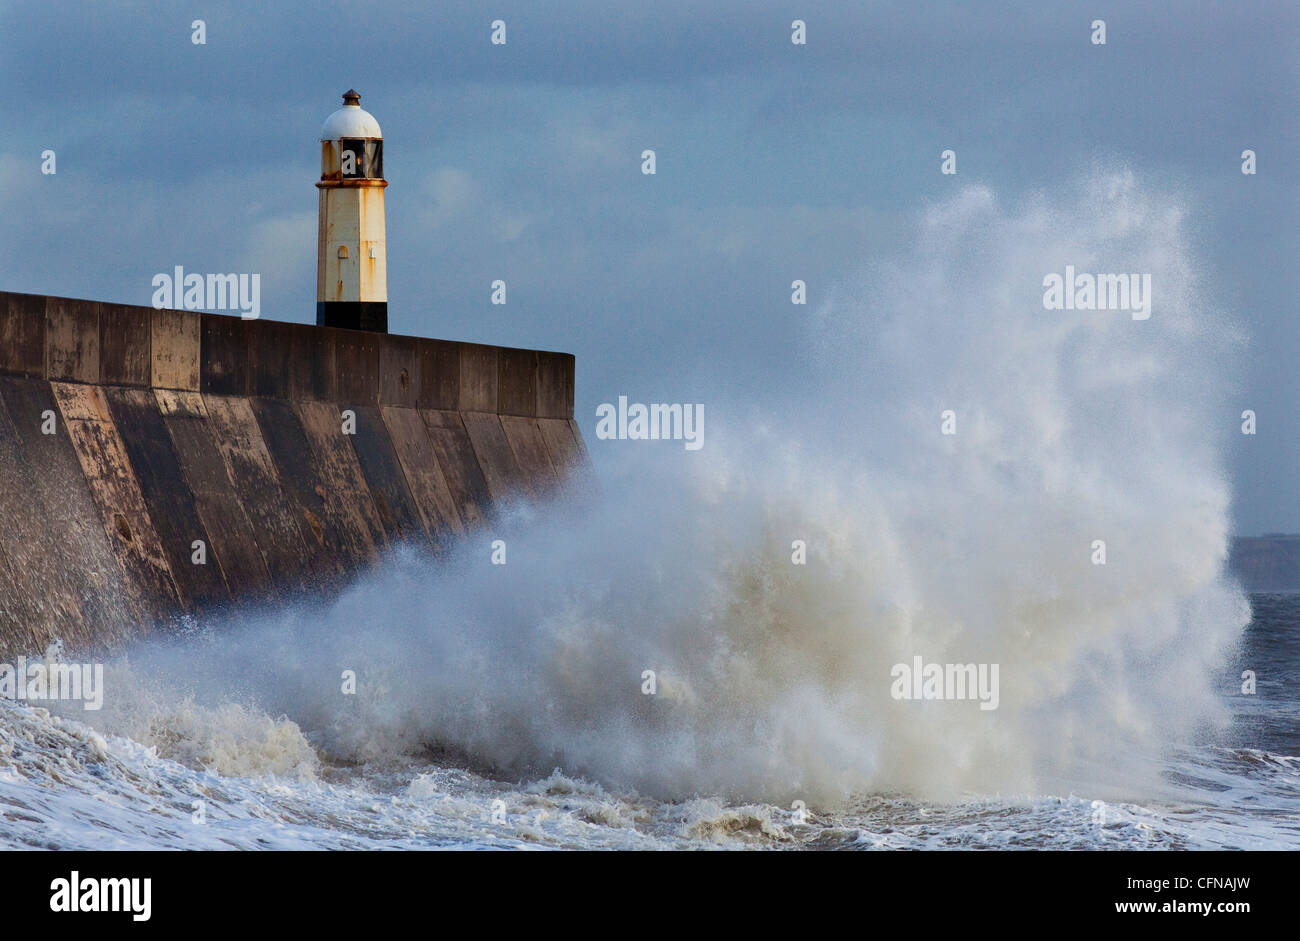 Harbour light, Porthcawl, South Wales, Wales, United Kingdom, Europe Stock Photo